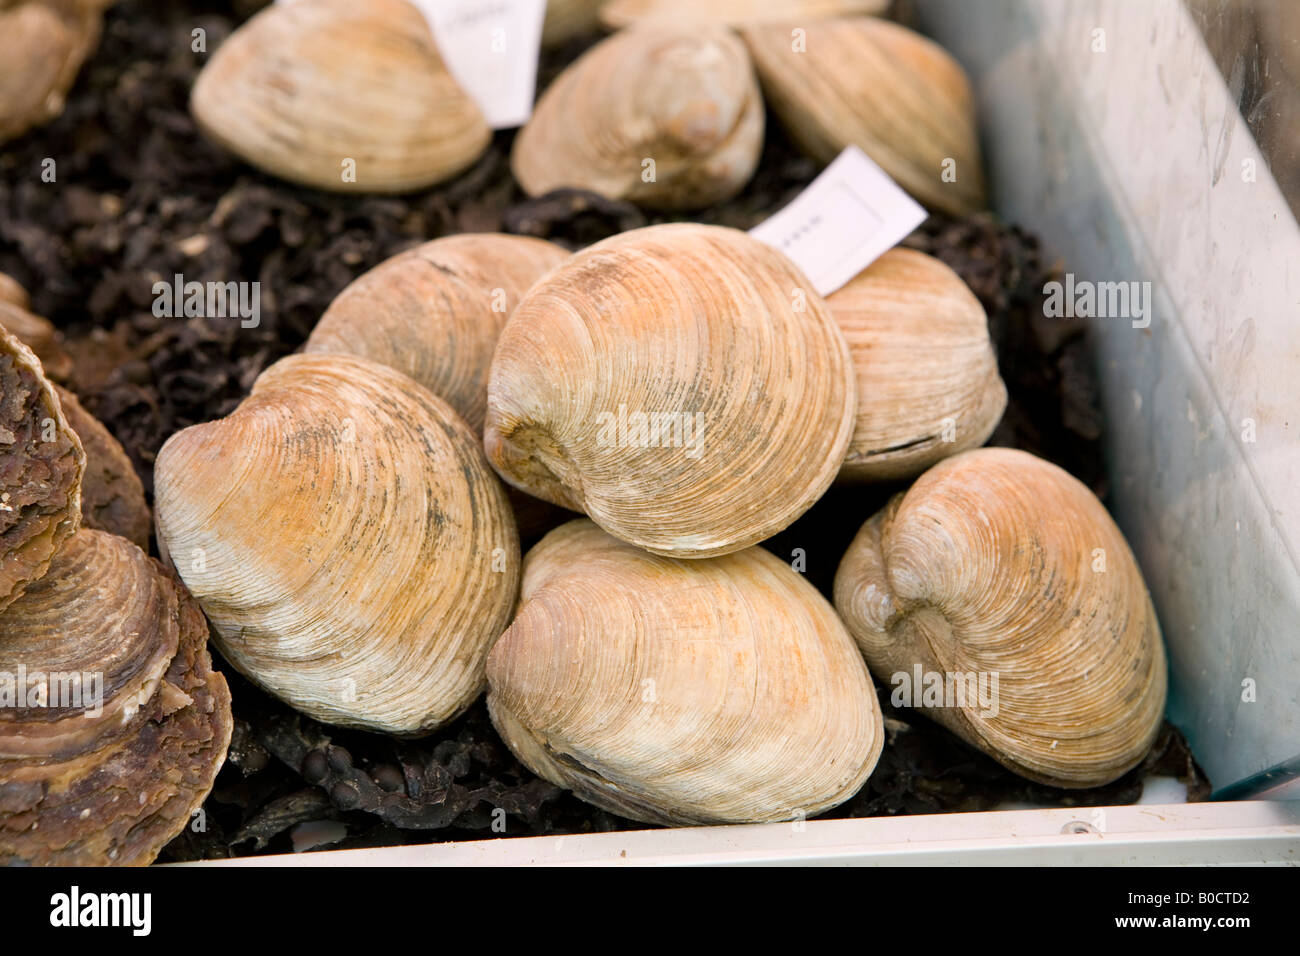 oysters Stock Photo